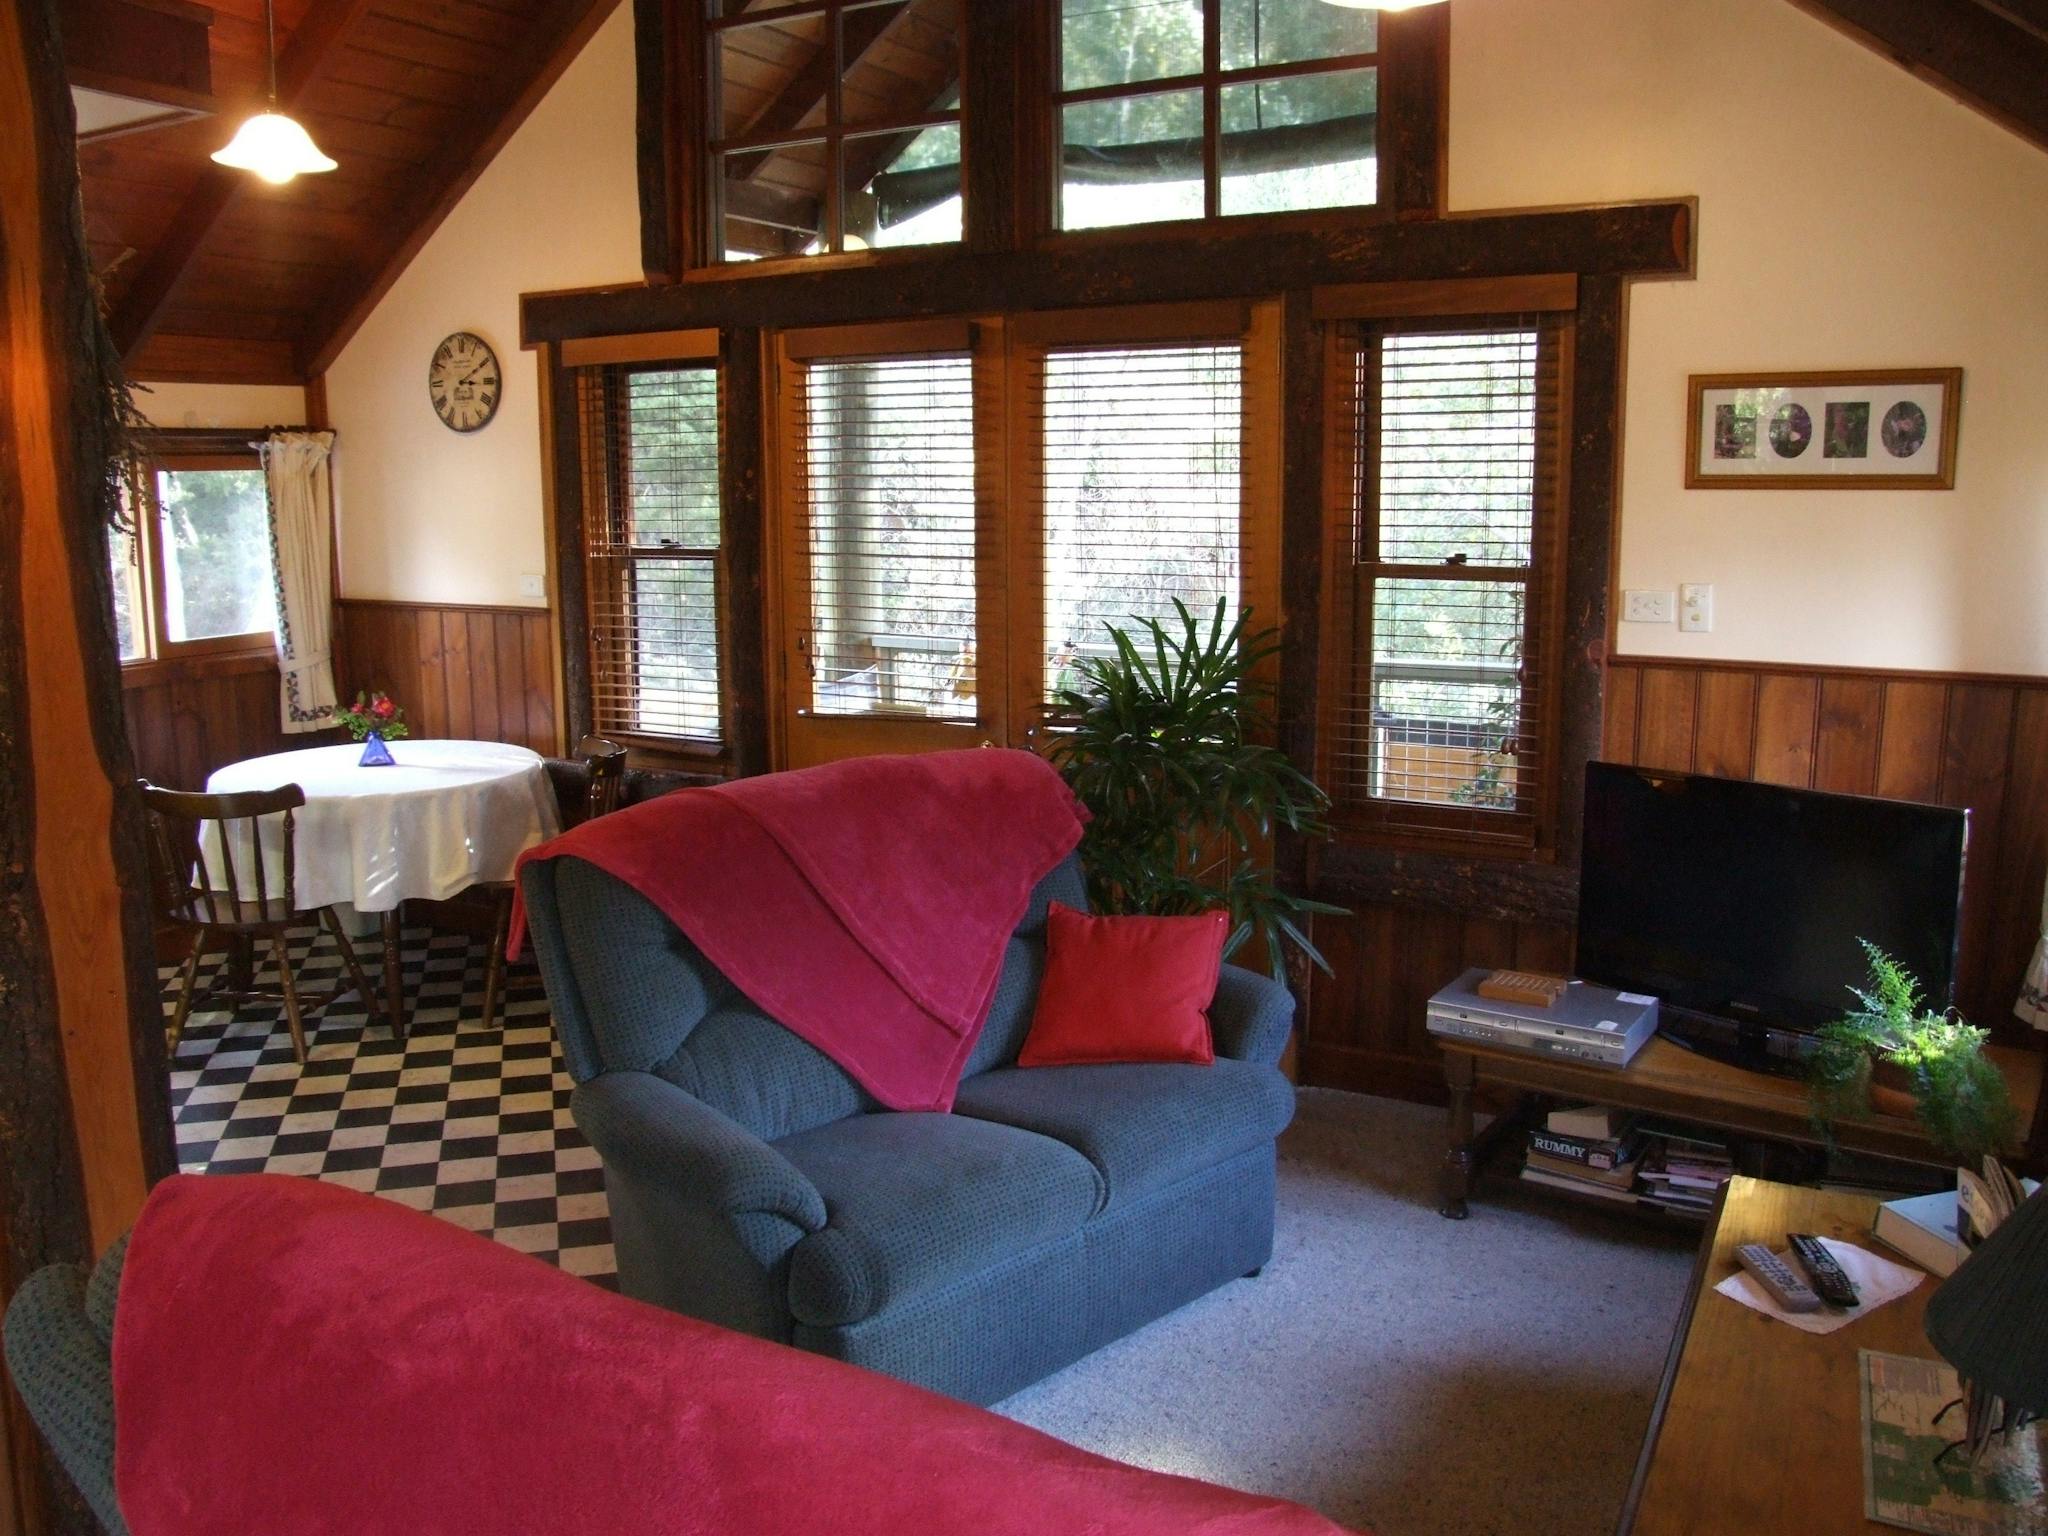 Relax in the delightful bed and breakfast overlooking the Ovens River